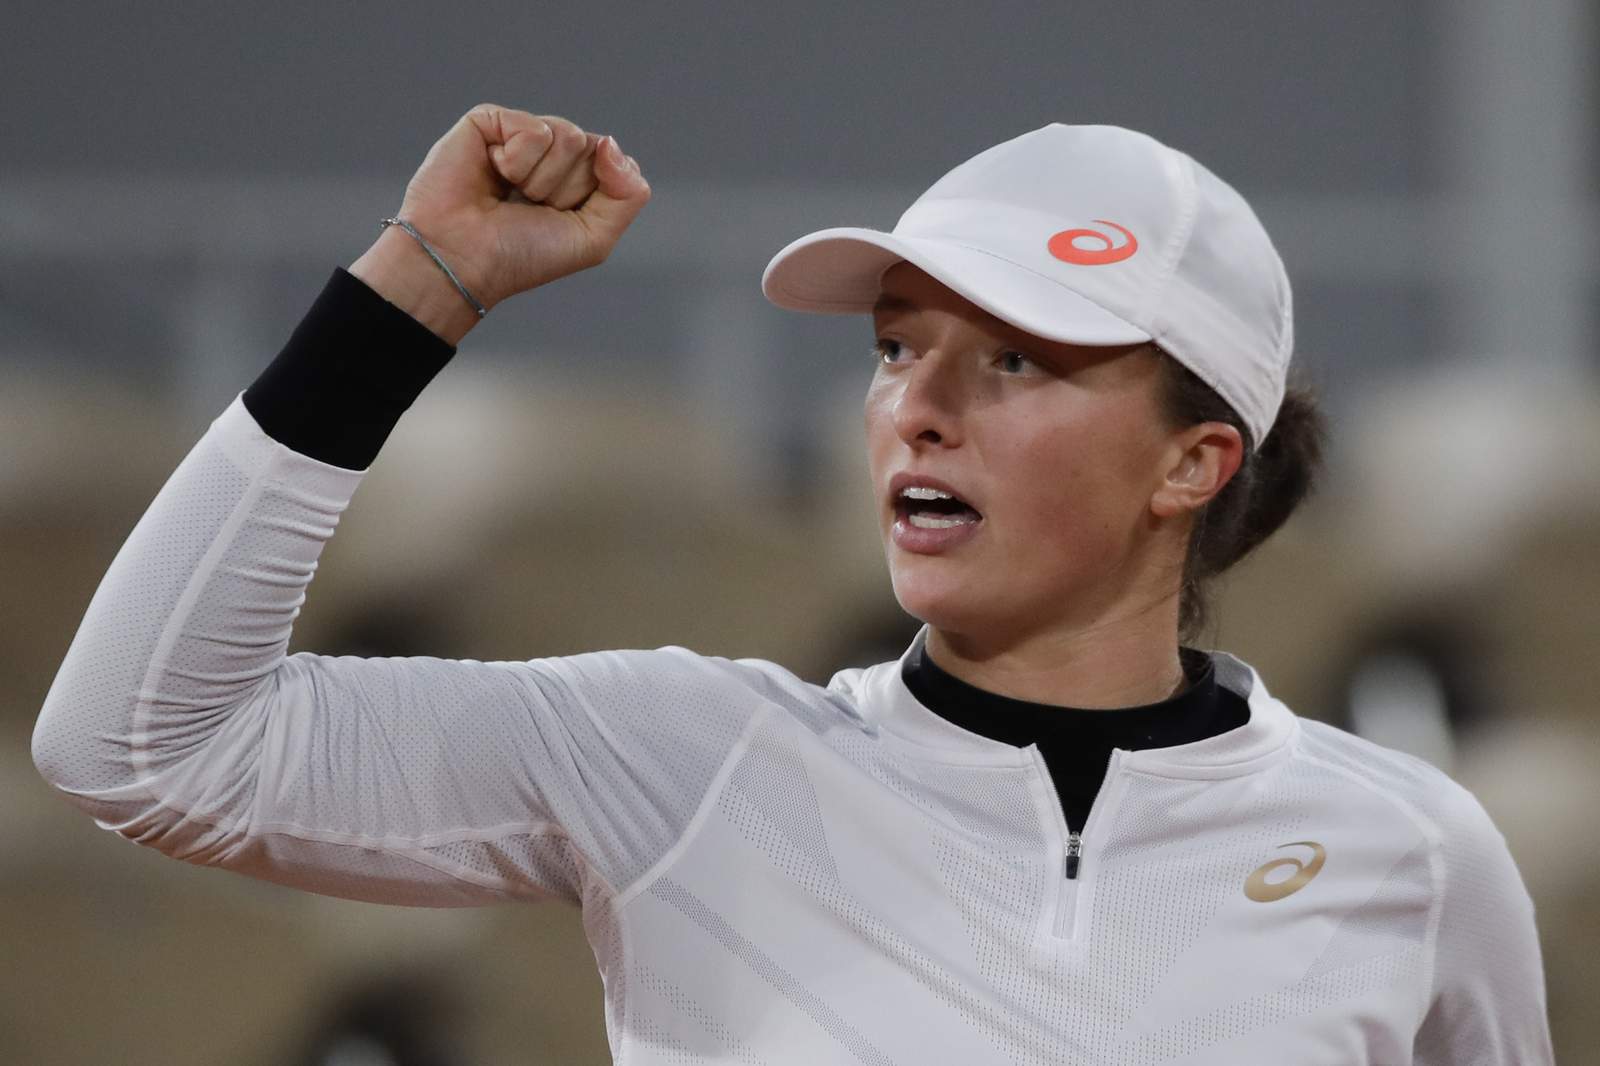 The Latest: 19-year-old Swiatek into French Open semifinals